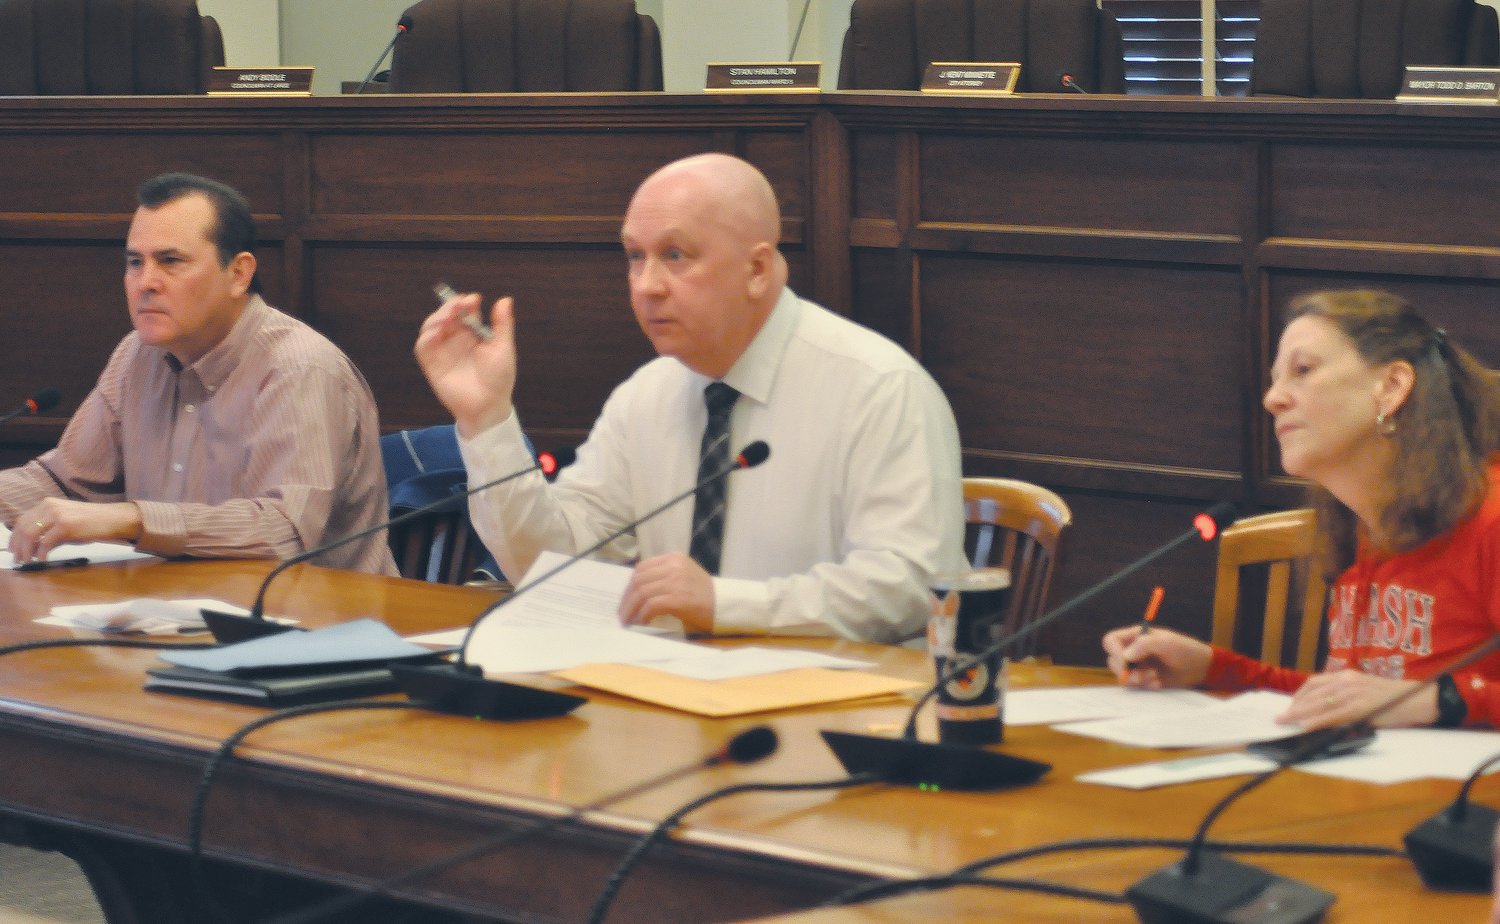 Crawfordsville Mayor Todd Barton, center, speaks during the Board of Public Works and Safety meeting Wednesday alongside board members Erin Corbin and Susan Albrecht in the City Building. The city declared a public health emergency due to the coronavirus (COVID-19) outbreak.